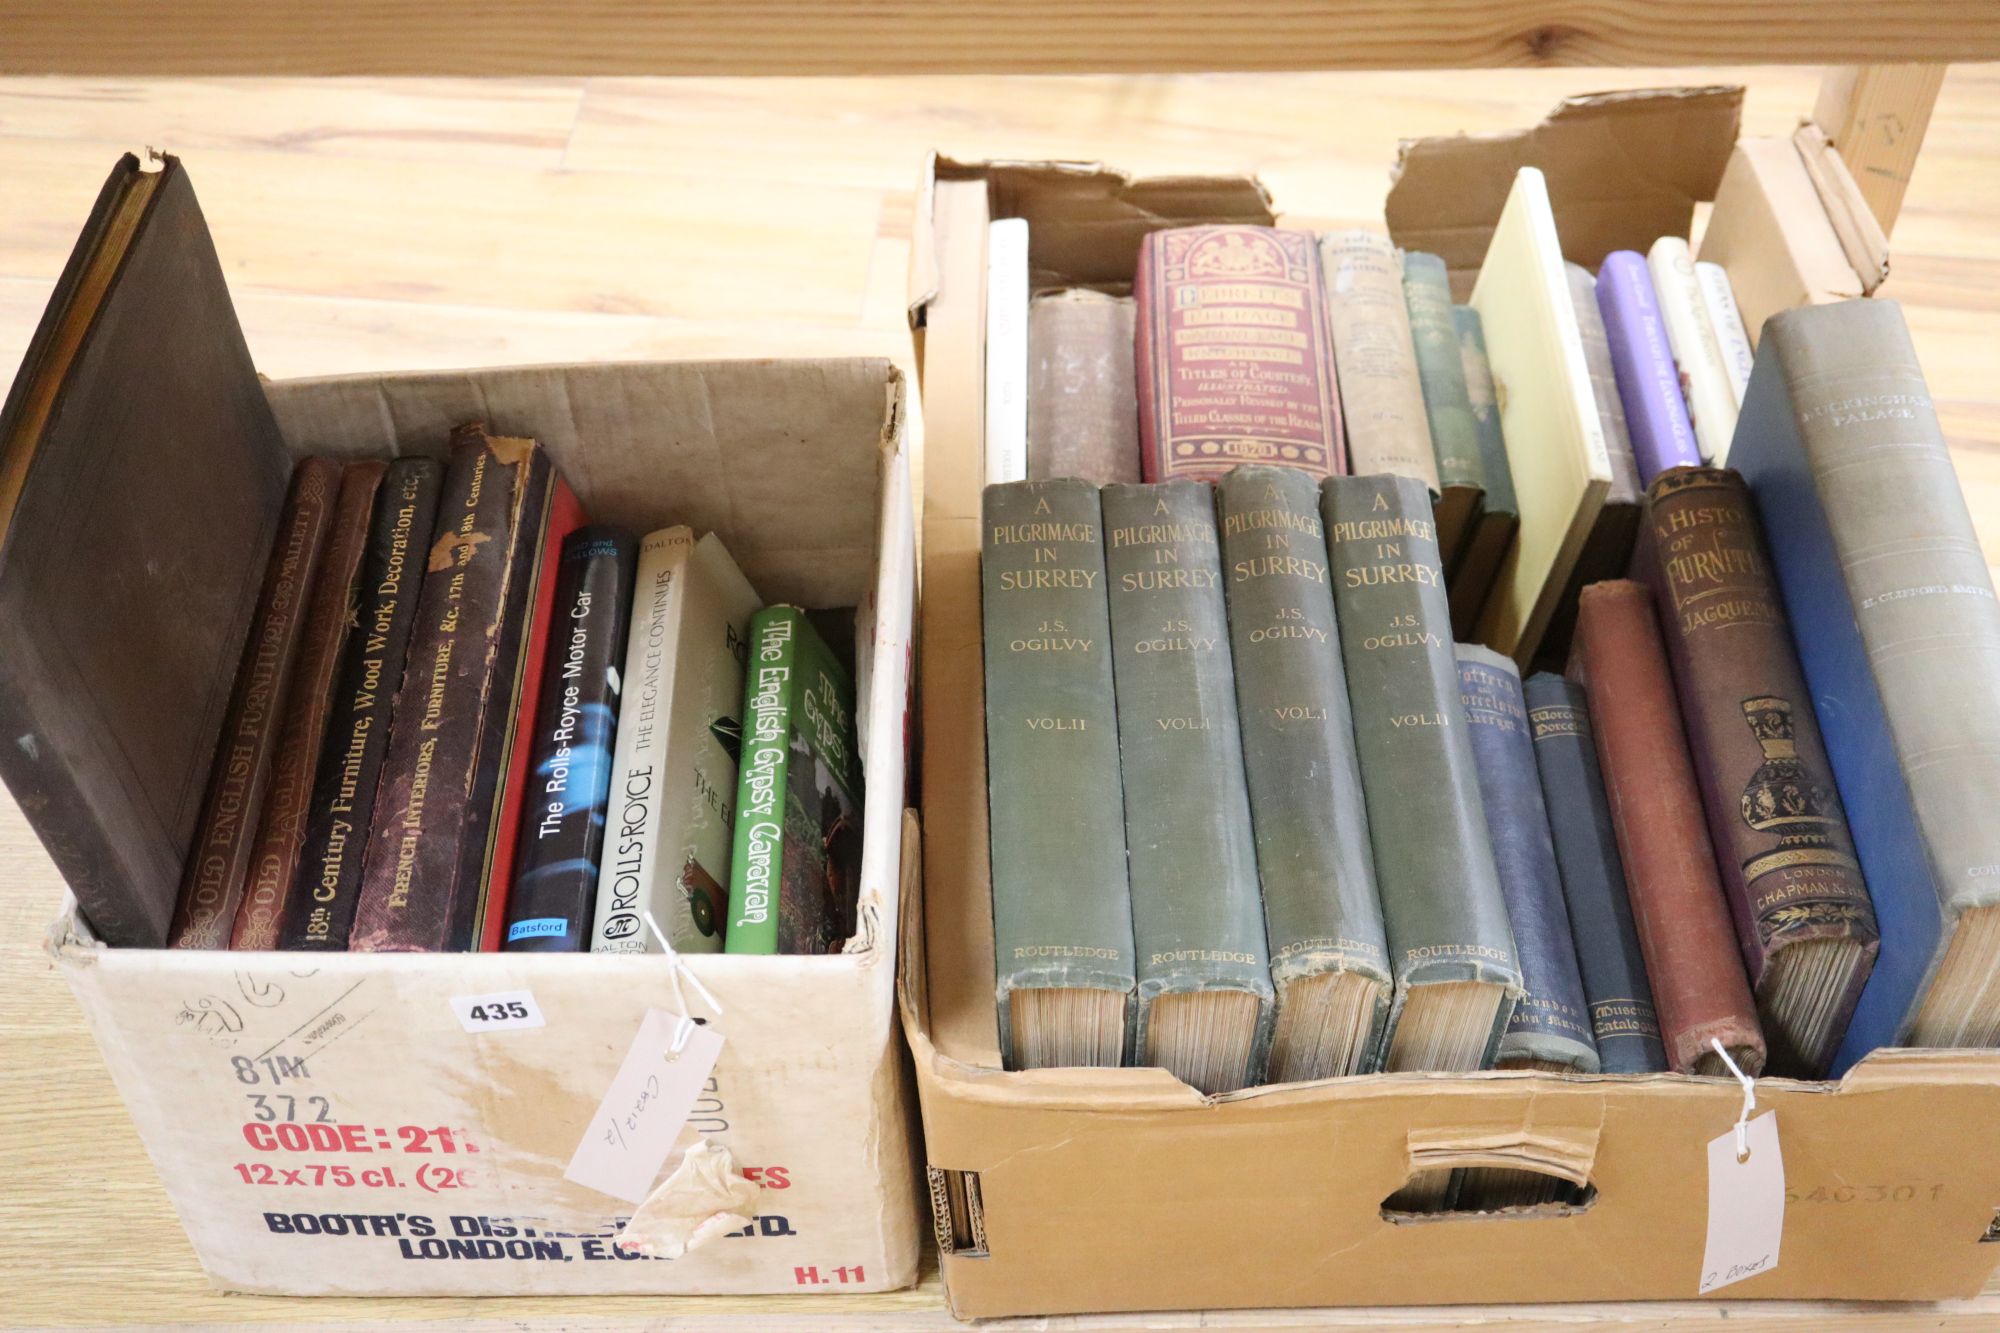 Miscellaneous books including Old English Furniture, The Rolls Royce Motor Car, The Age of Rococo, Coins of England, etc.